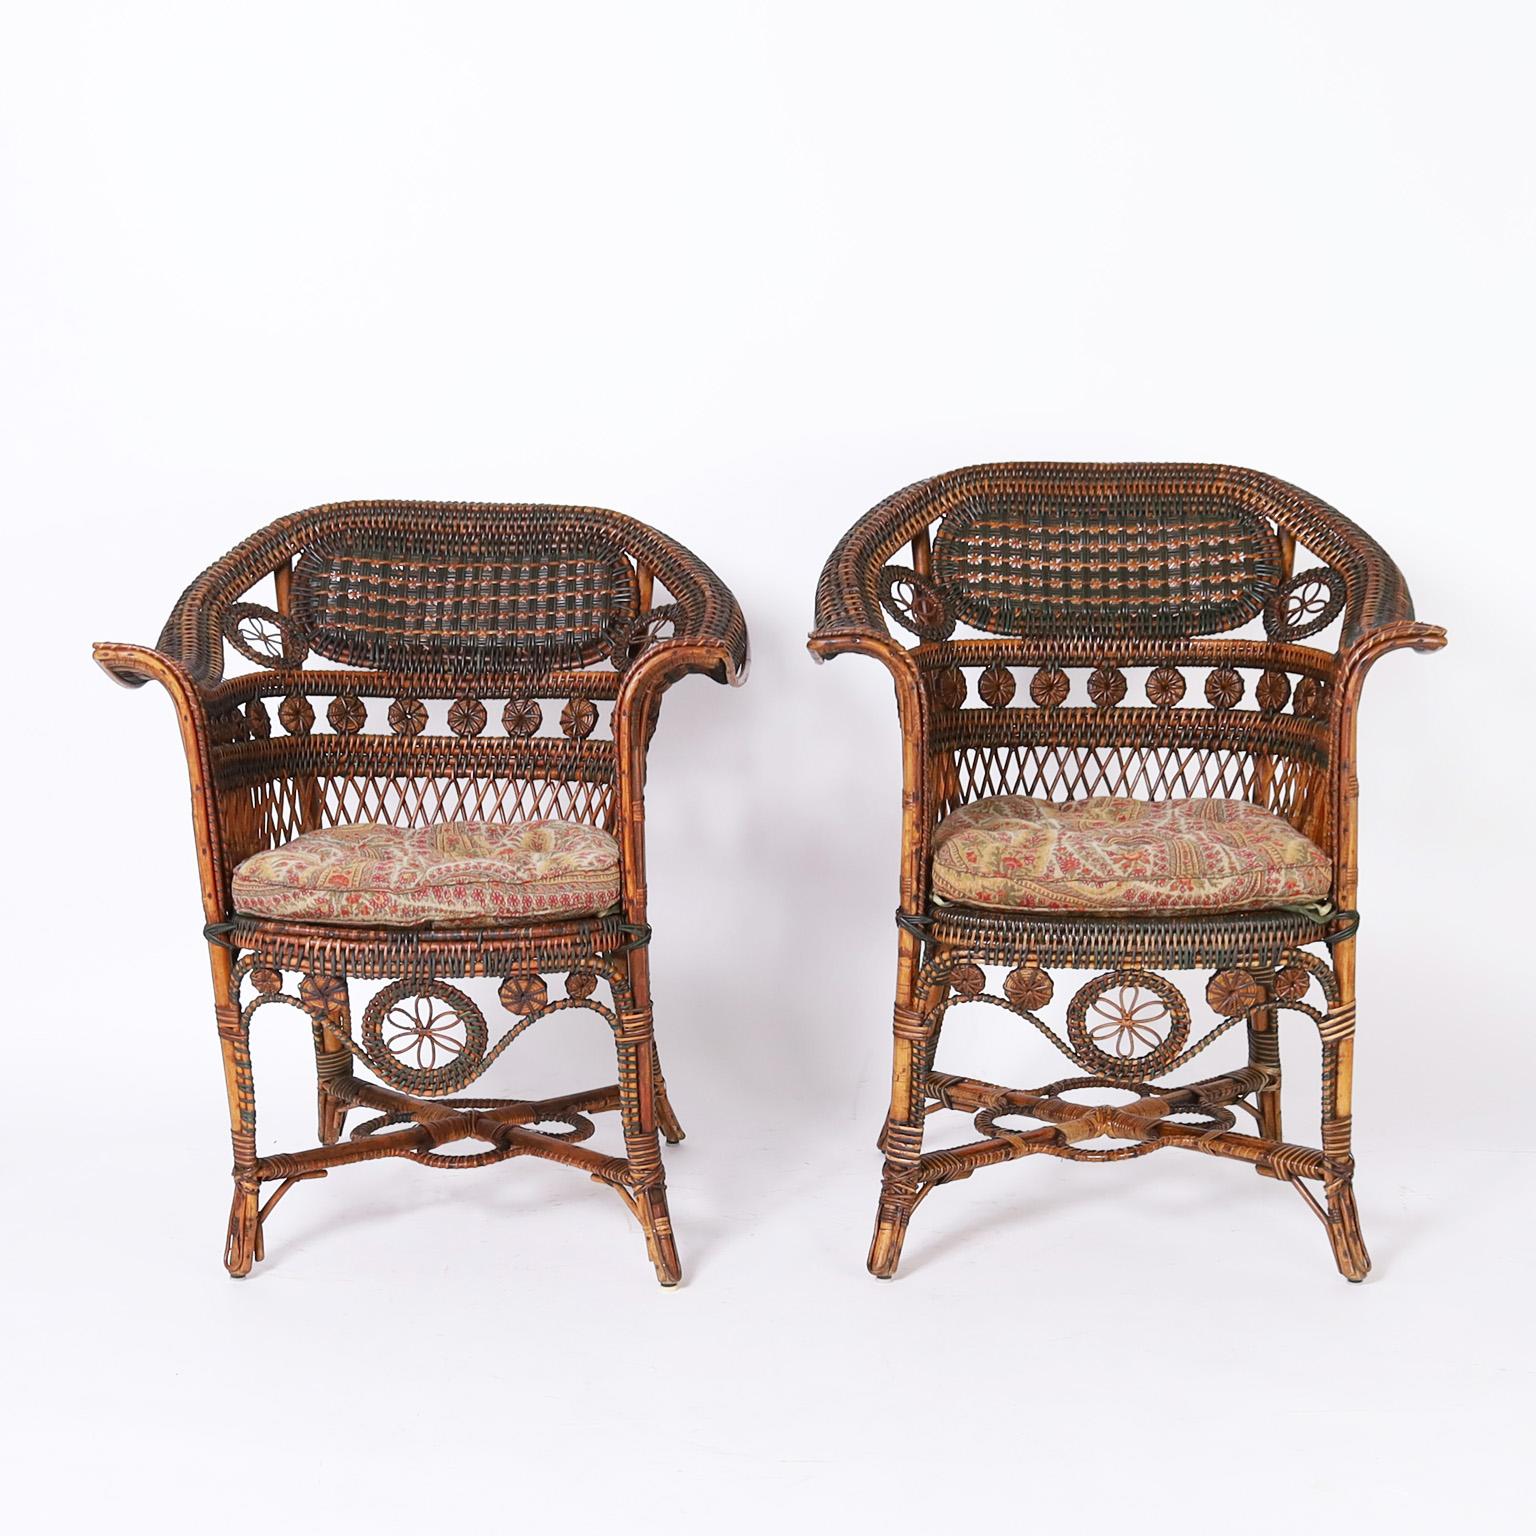 Impressive pair of antique French rattan and reed cafe chairs with bent wood frames decorated with painted and natural reed wrapped rattan in a graceful form with sturdy cross stretchers. Signed Pierre Leroux. As seen in the last photo of the